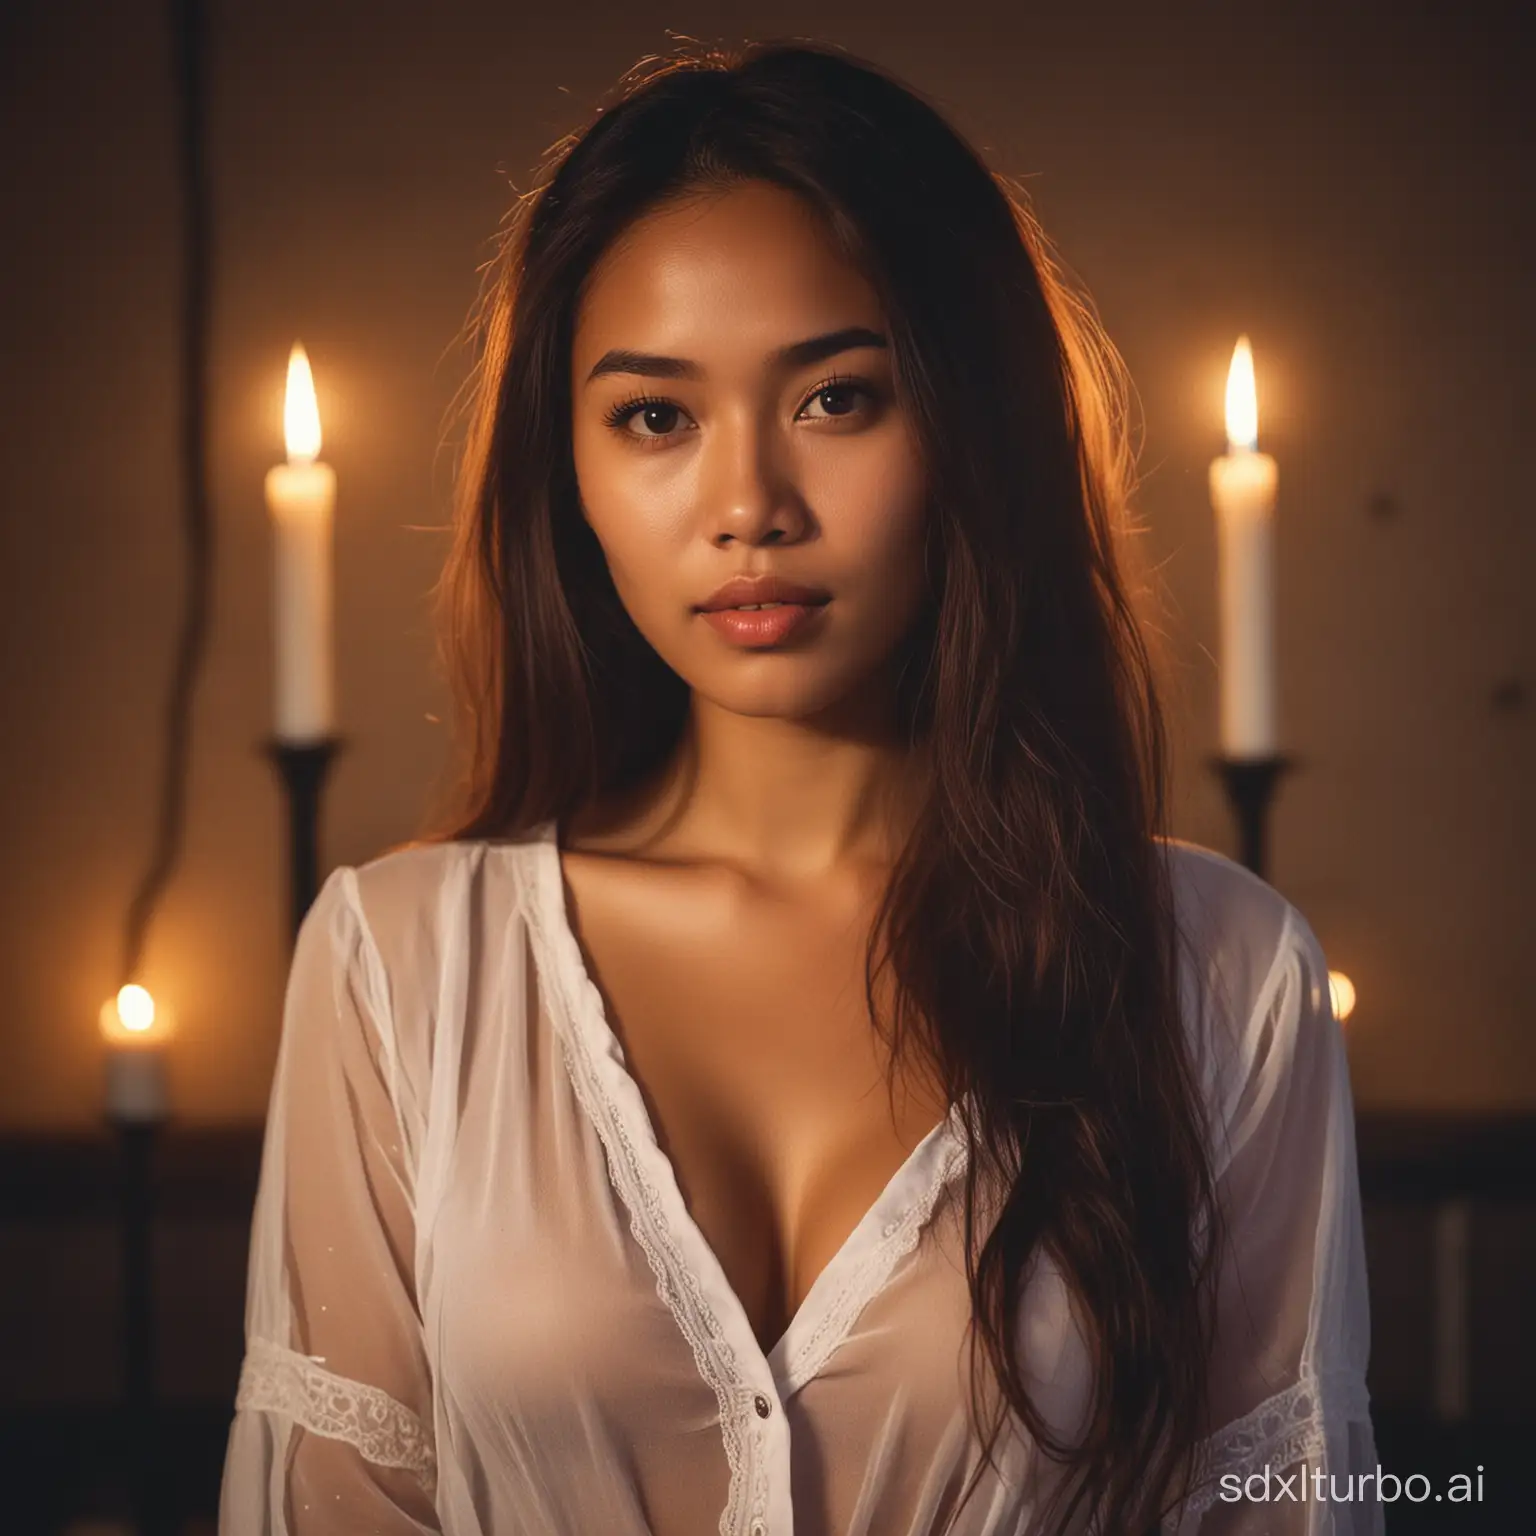 Medieval-Portrait-of-a-Filipina-Woman-with-Candlelight-and-Soft-Hair